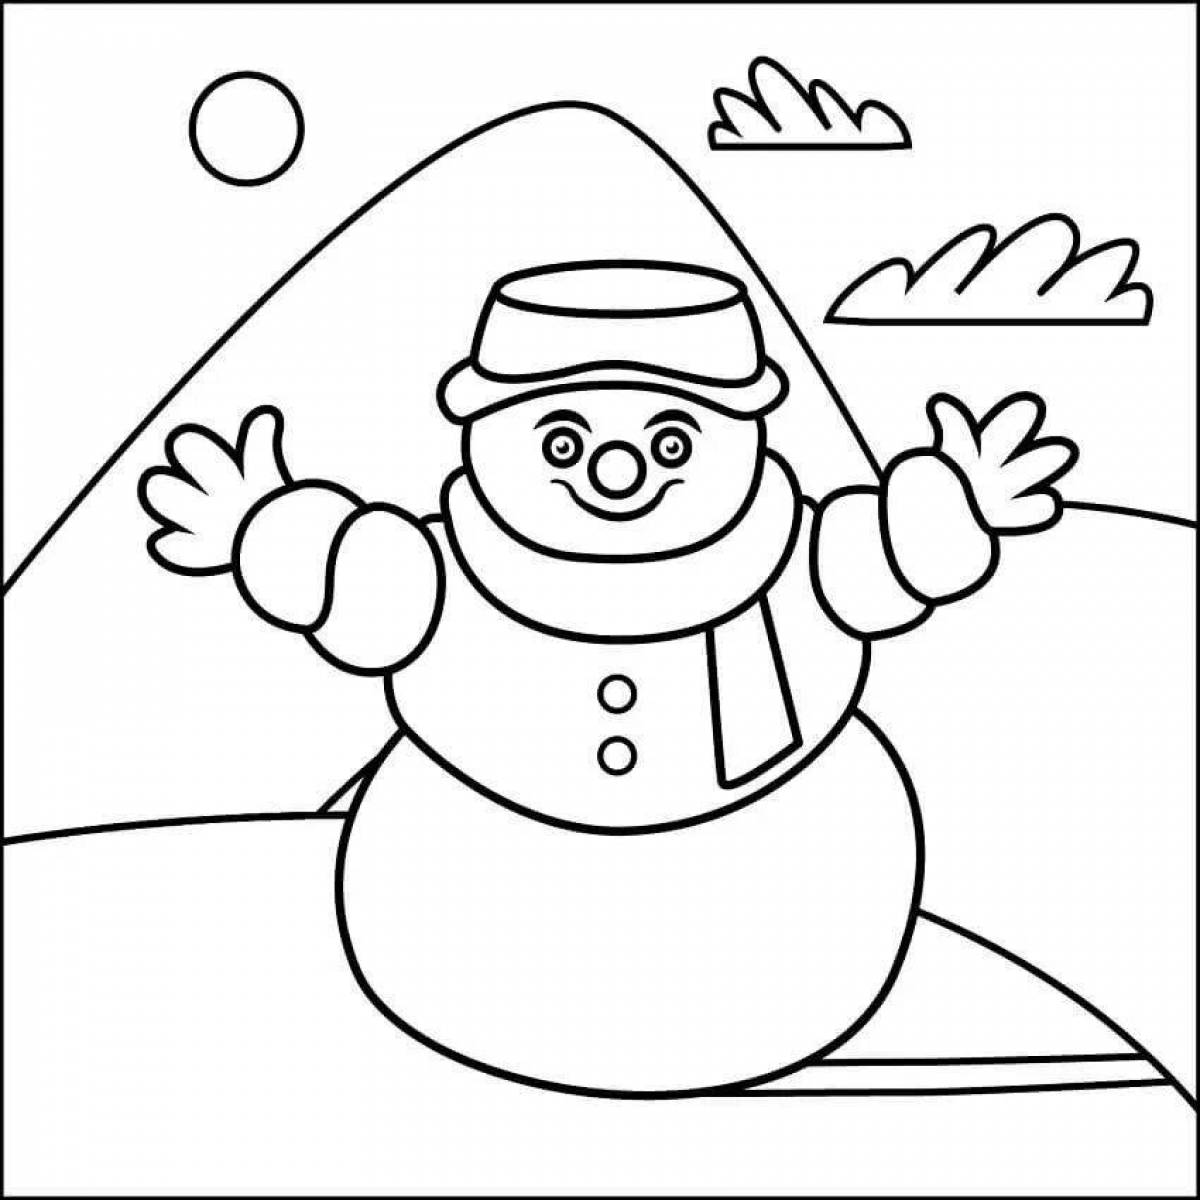 Nice snowman coloring book for kids 6-7 years old